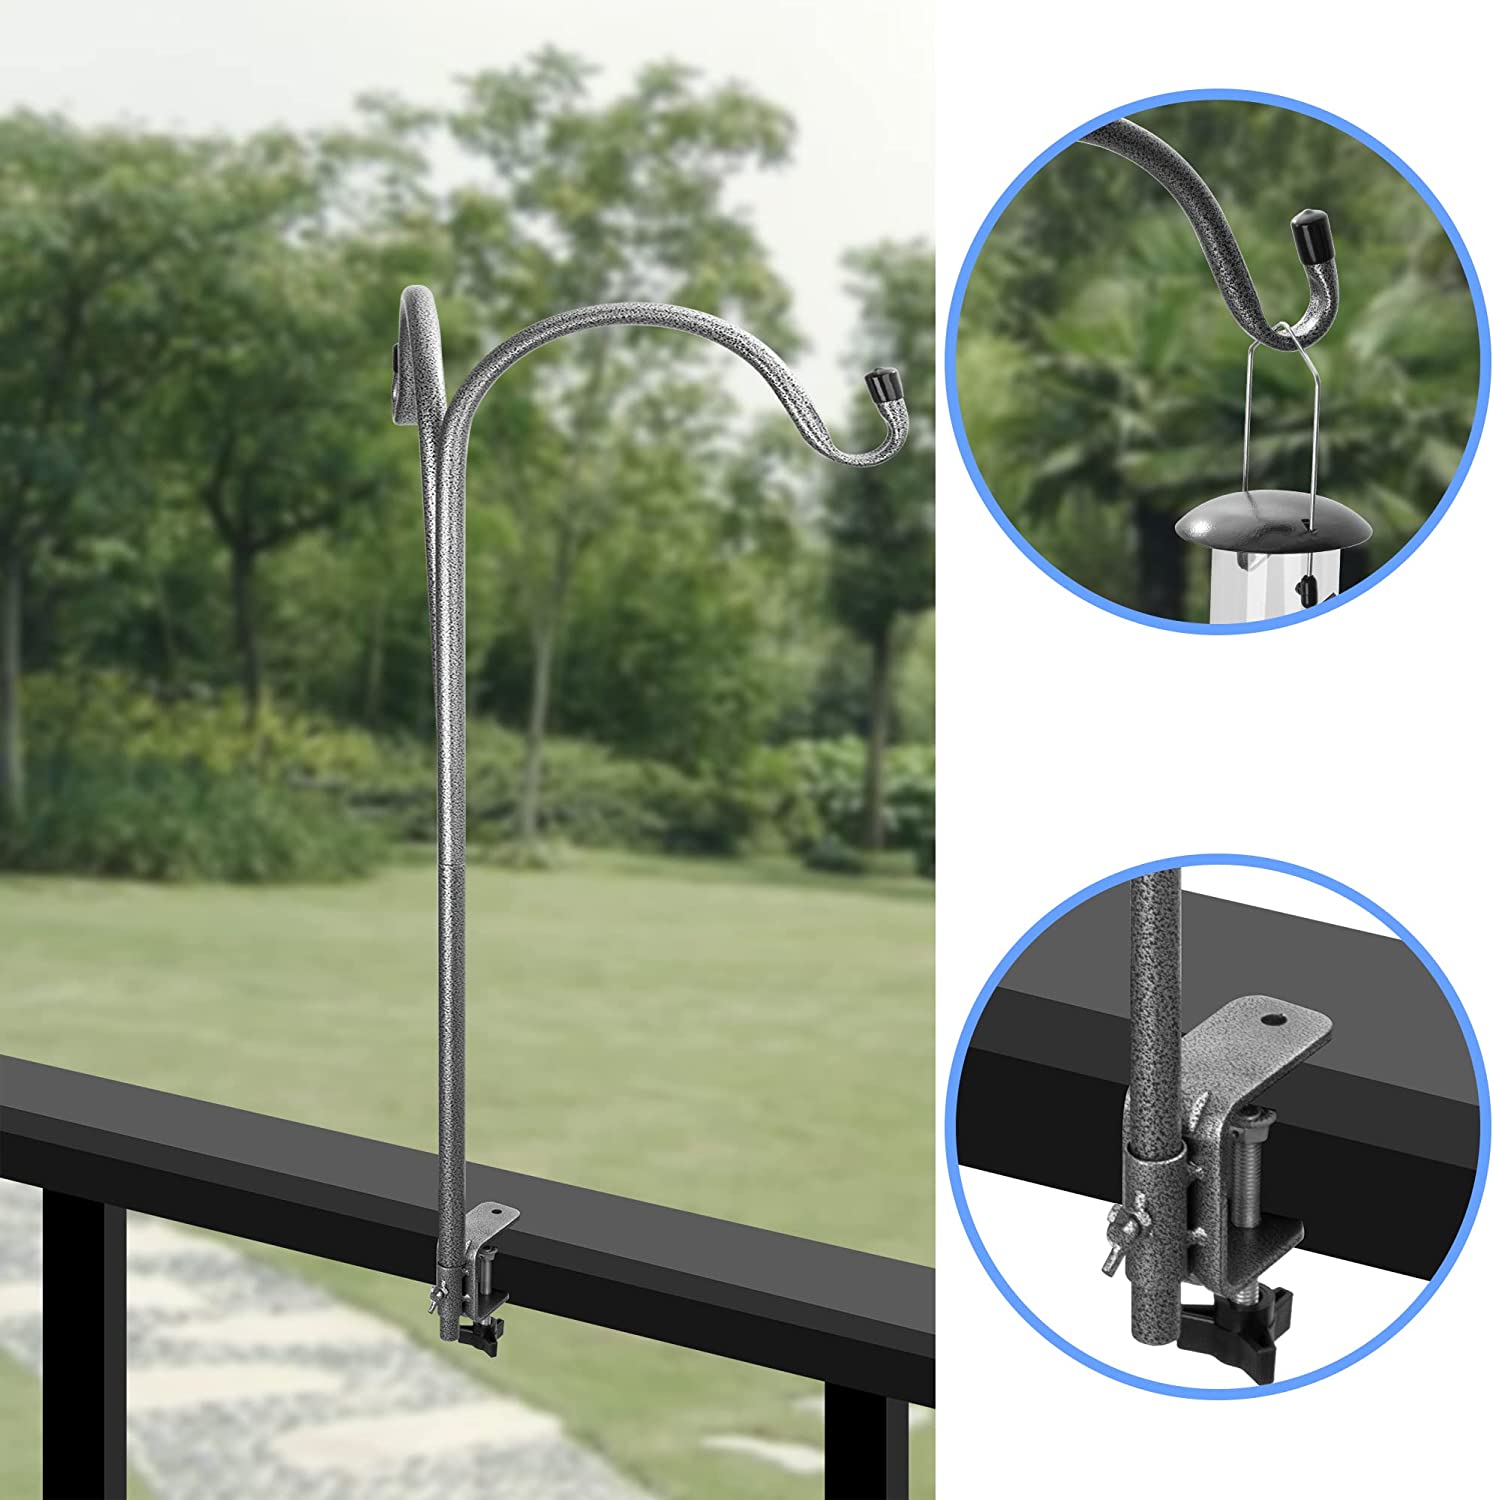 Double Shepherds Hook Adjustable Bird Feeder Pole for Outdoor with 4 Prongs Base,65 Inch Heavy Duty Garden Hanging Plant Hooks Stand Outside for Plant Hanger Wedding Decoration (Pack of 2) - image 3 of 7